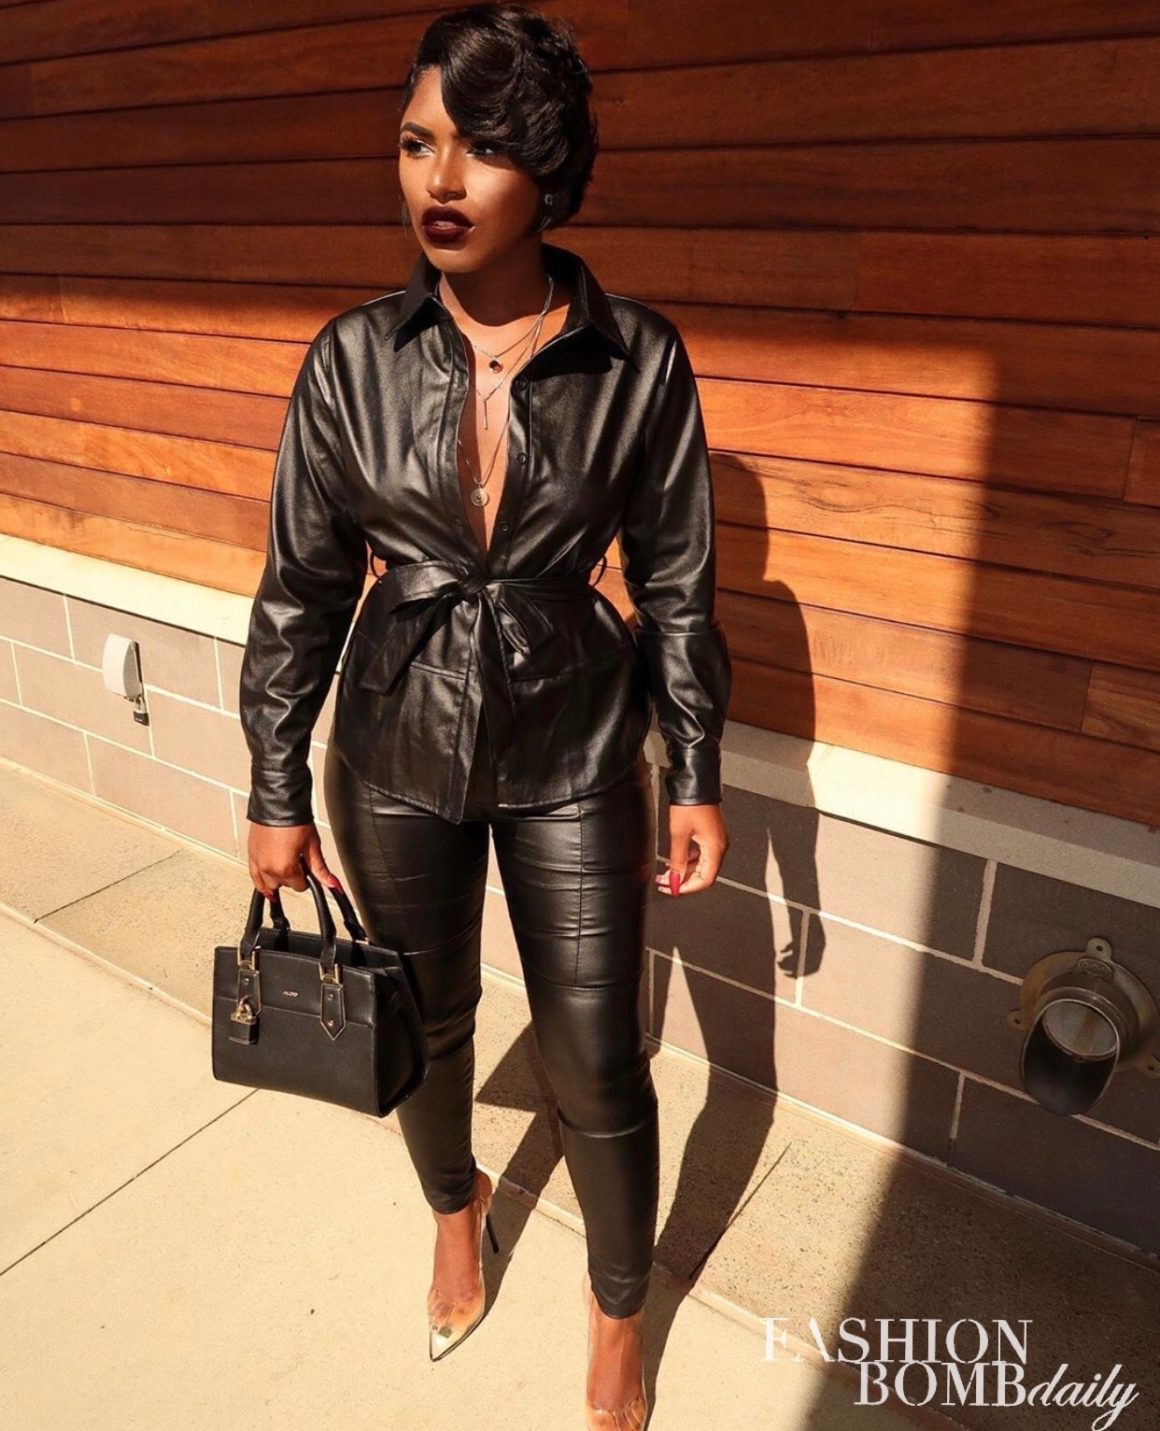 Fashion Bombshell of the Day: Daiquan from Charlotte! – Fashion Bomb Daily